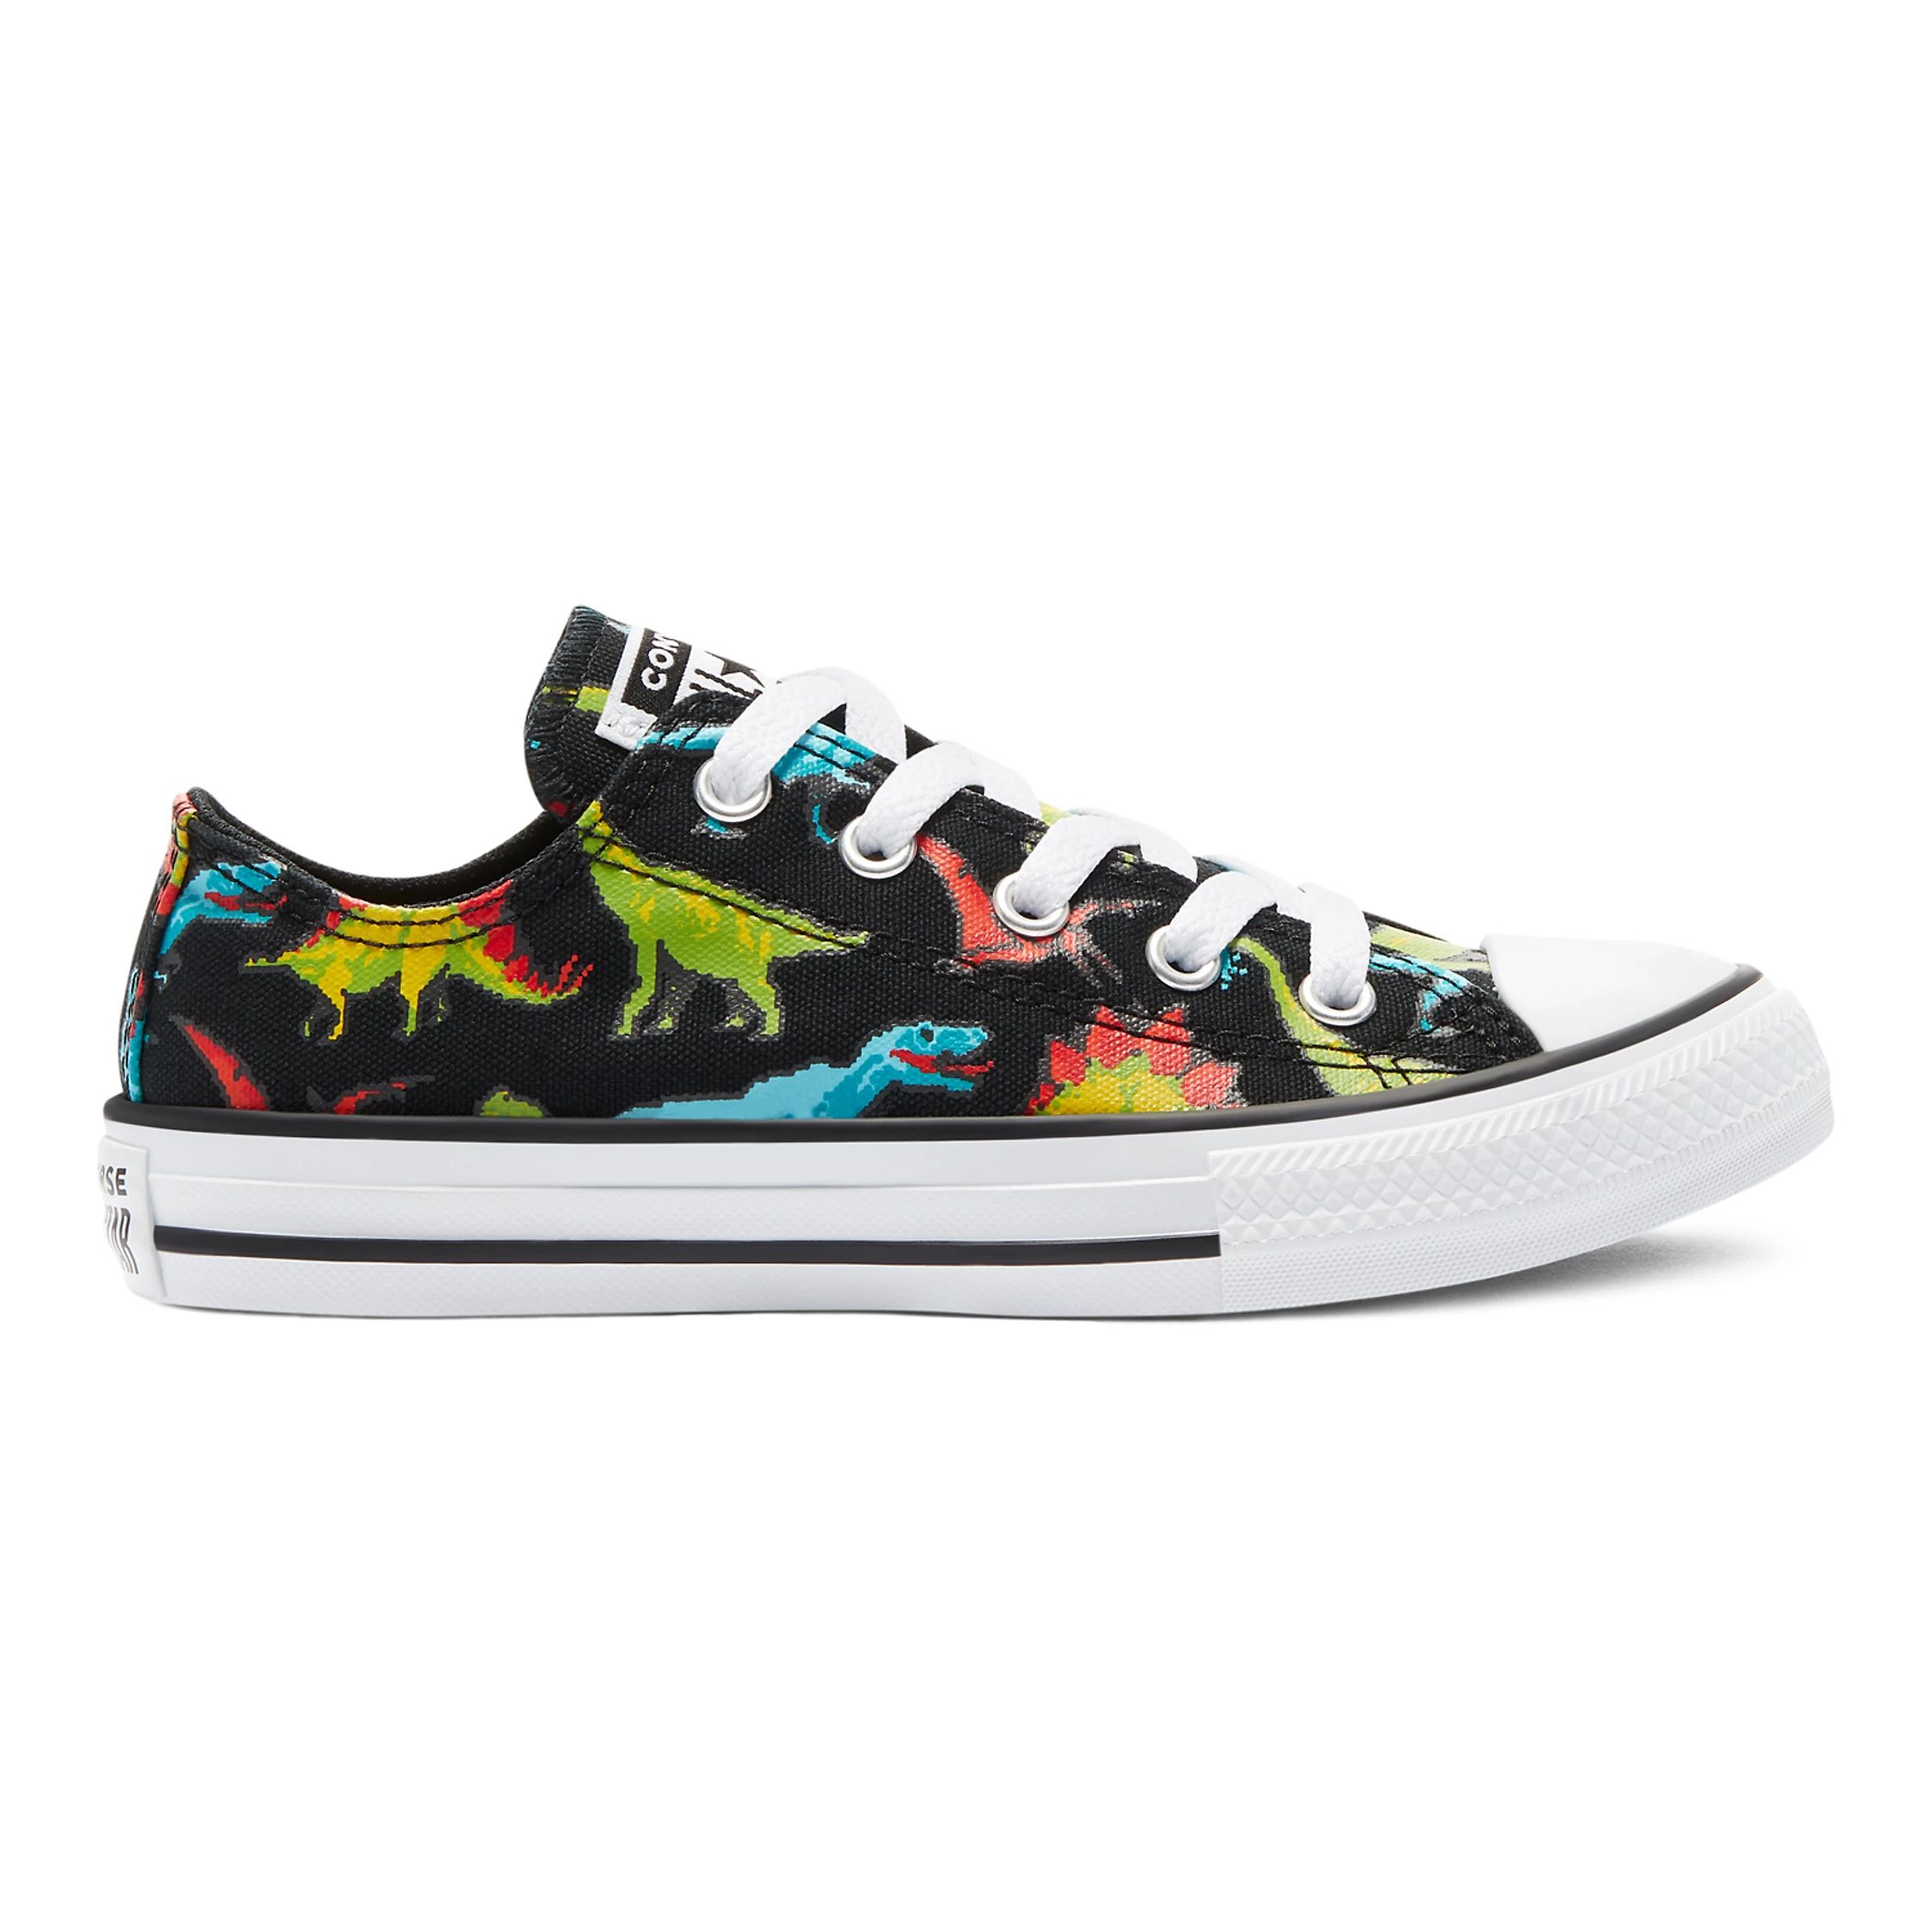 Boys' Converse Chuck Taylor All Star Dinoverse Sneakers | Kohl's